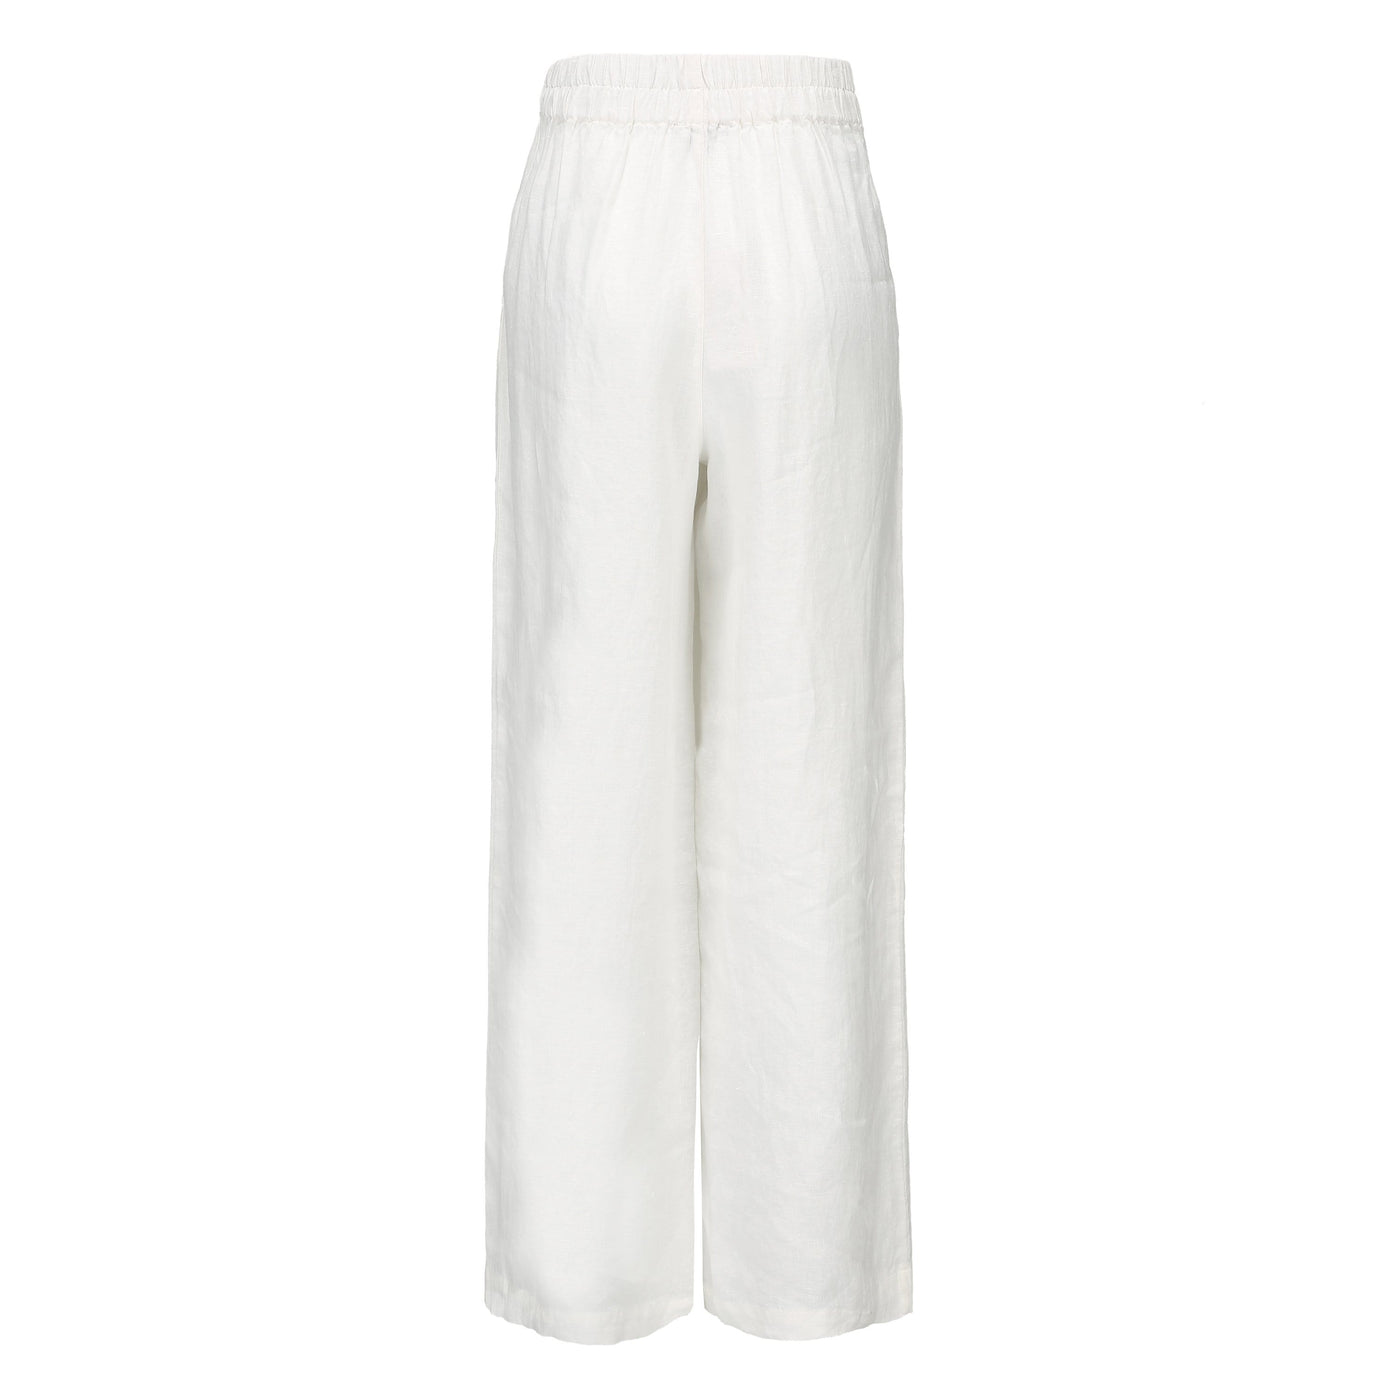 Lilly Pilly Collection 100% organic linen Olivia Pants in Ivory as 3D image showing back view